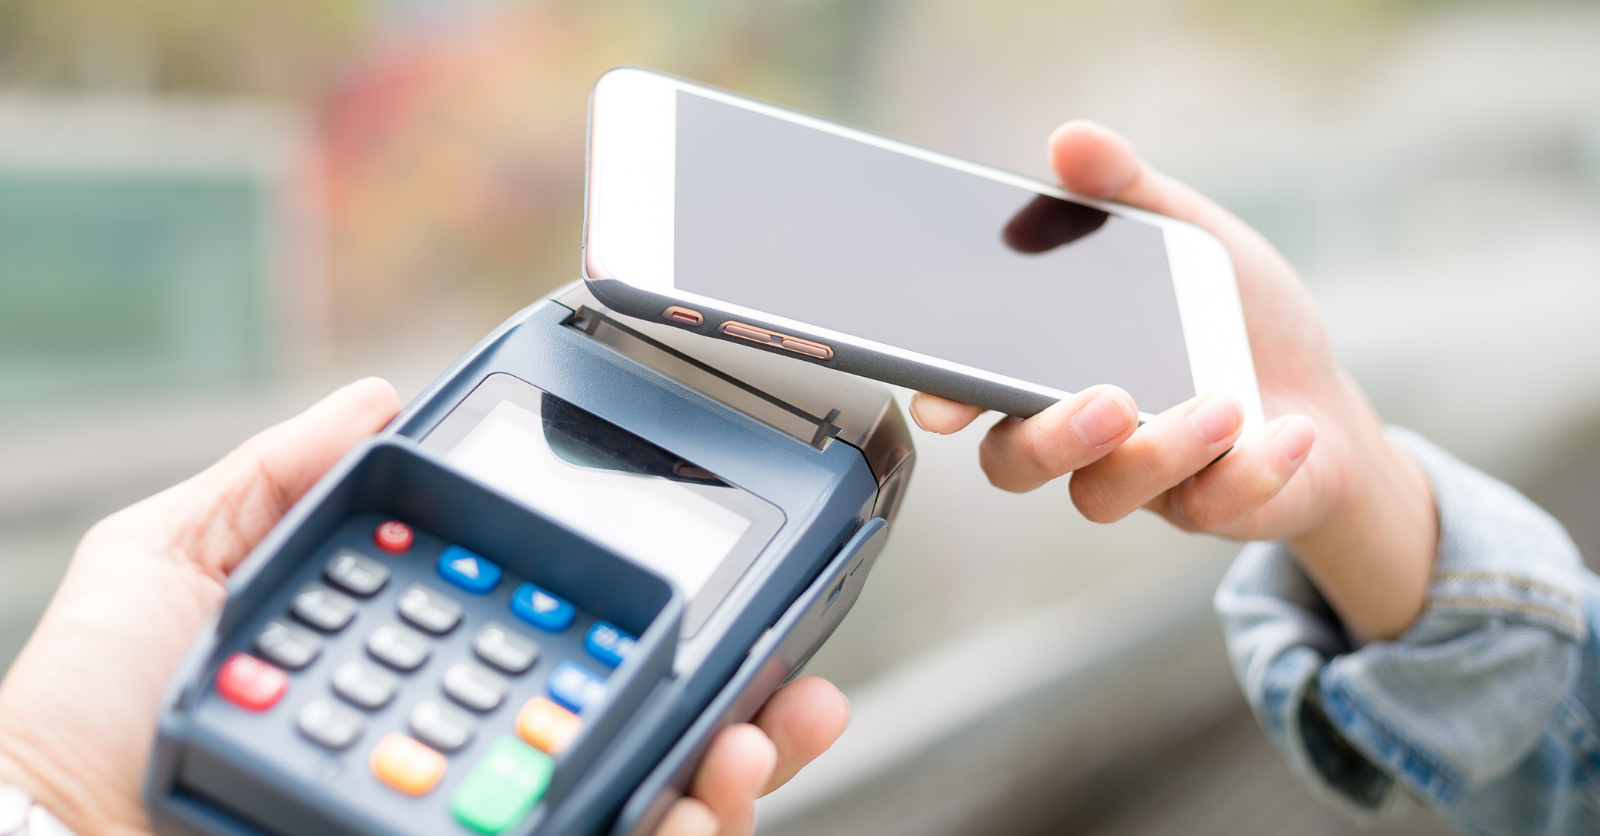 Commerce in a Post-COVID World: Are Contactless Payments the Solution?